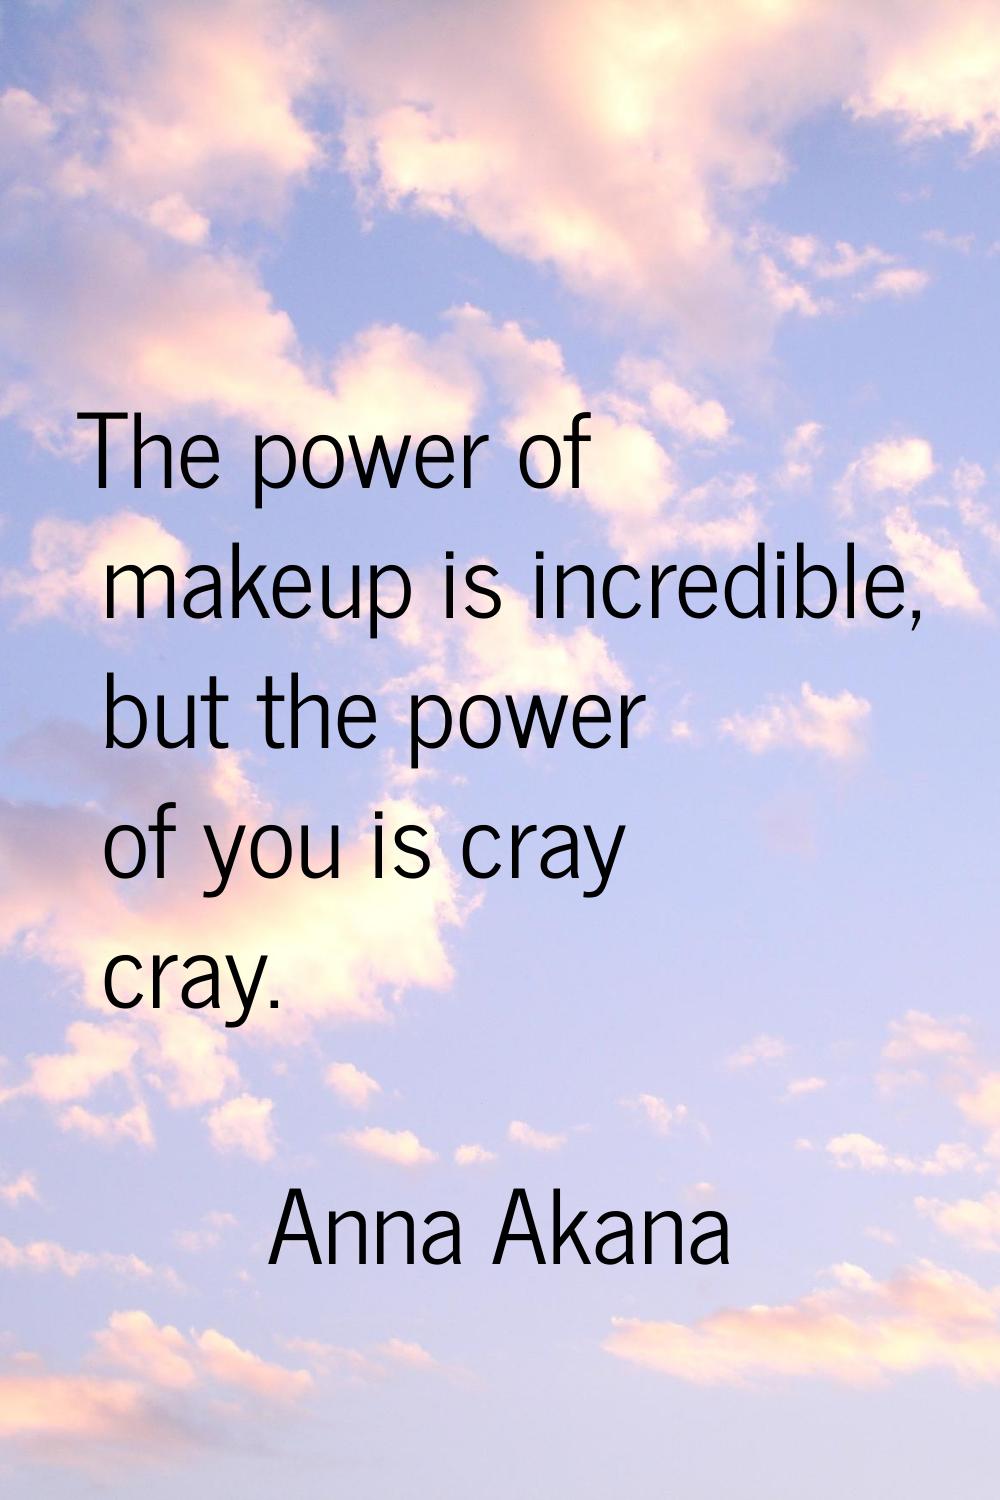 The power of makeup is incredible, but the power of you is cray cray.